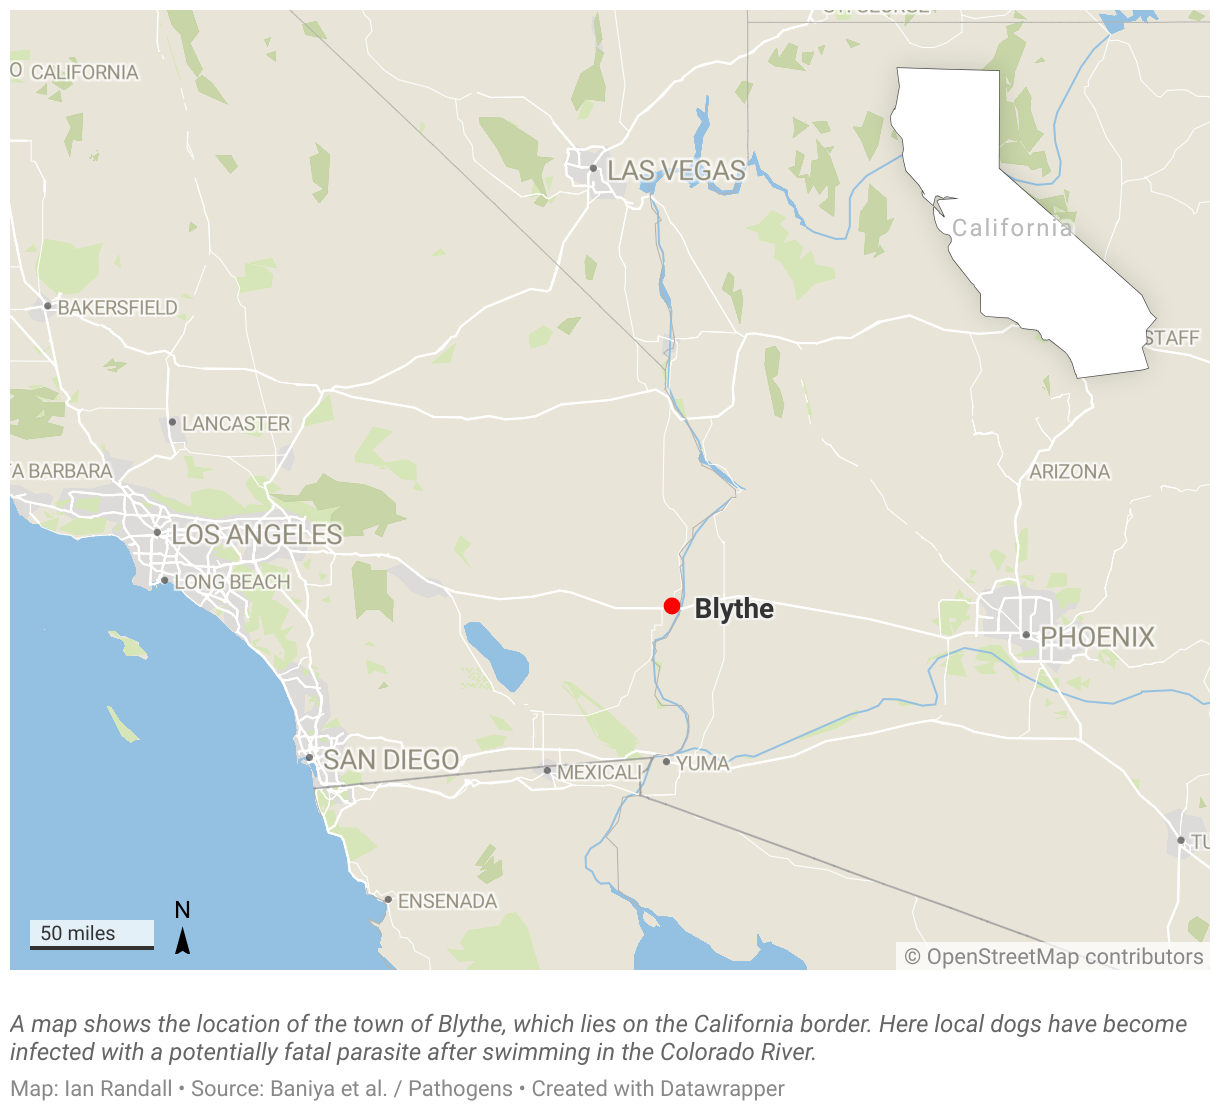 A map shows the location of the town of Blythe, which lies on the California border.